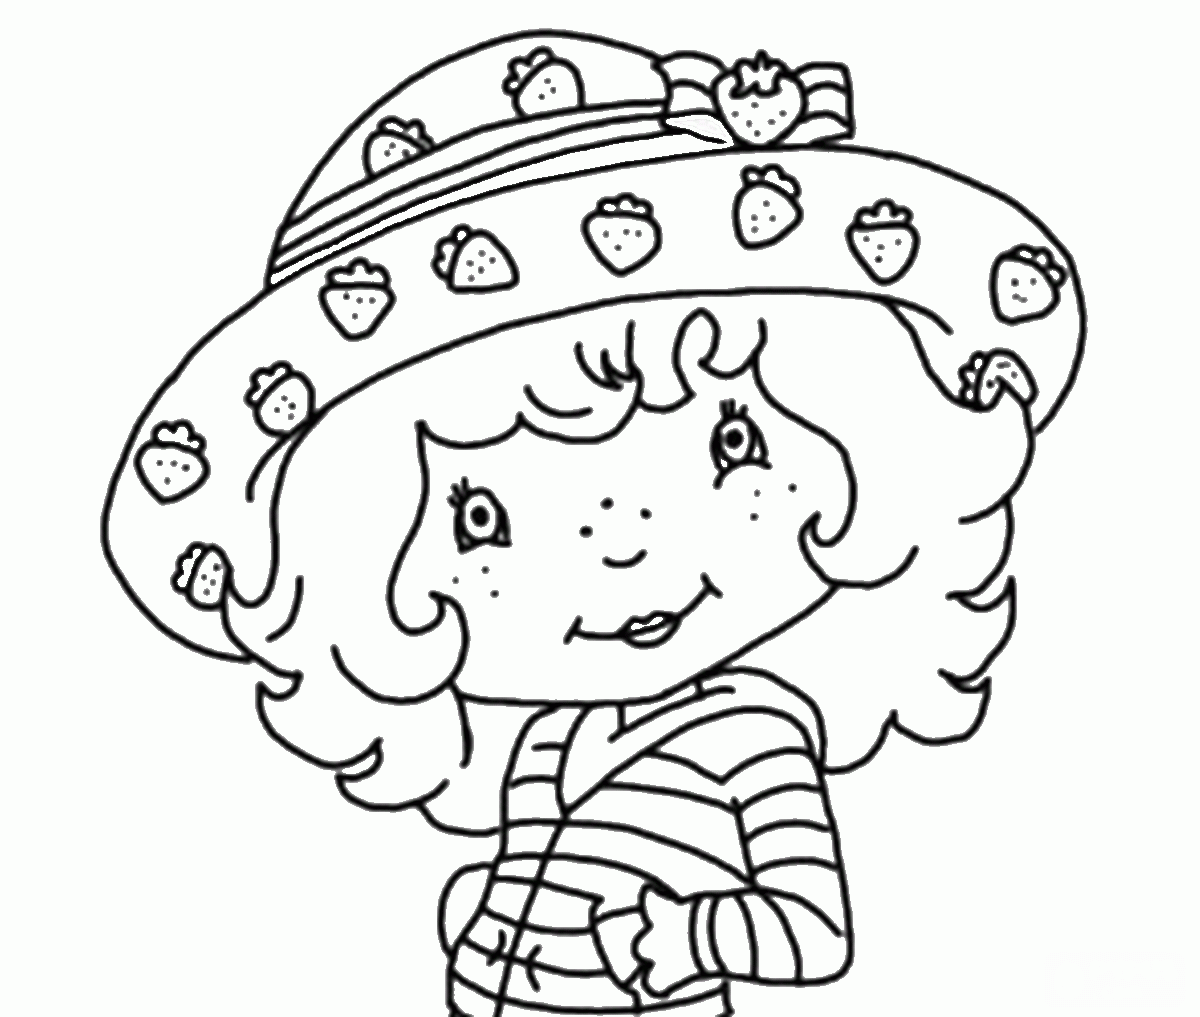 Strawberry Shortcake Coloring Pages TV Film Printable 2020 08144 Coloring4free